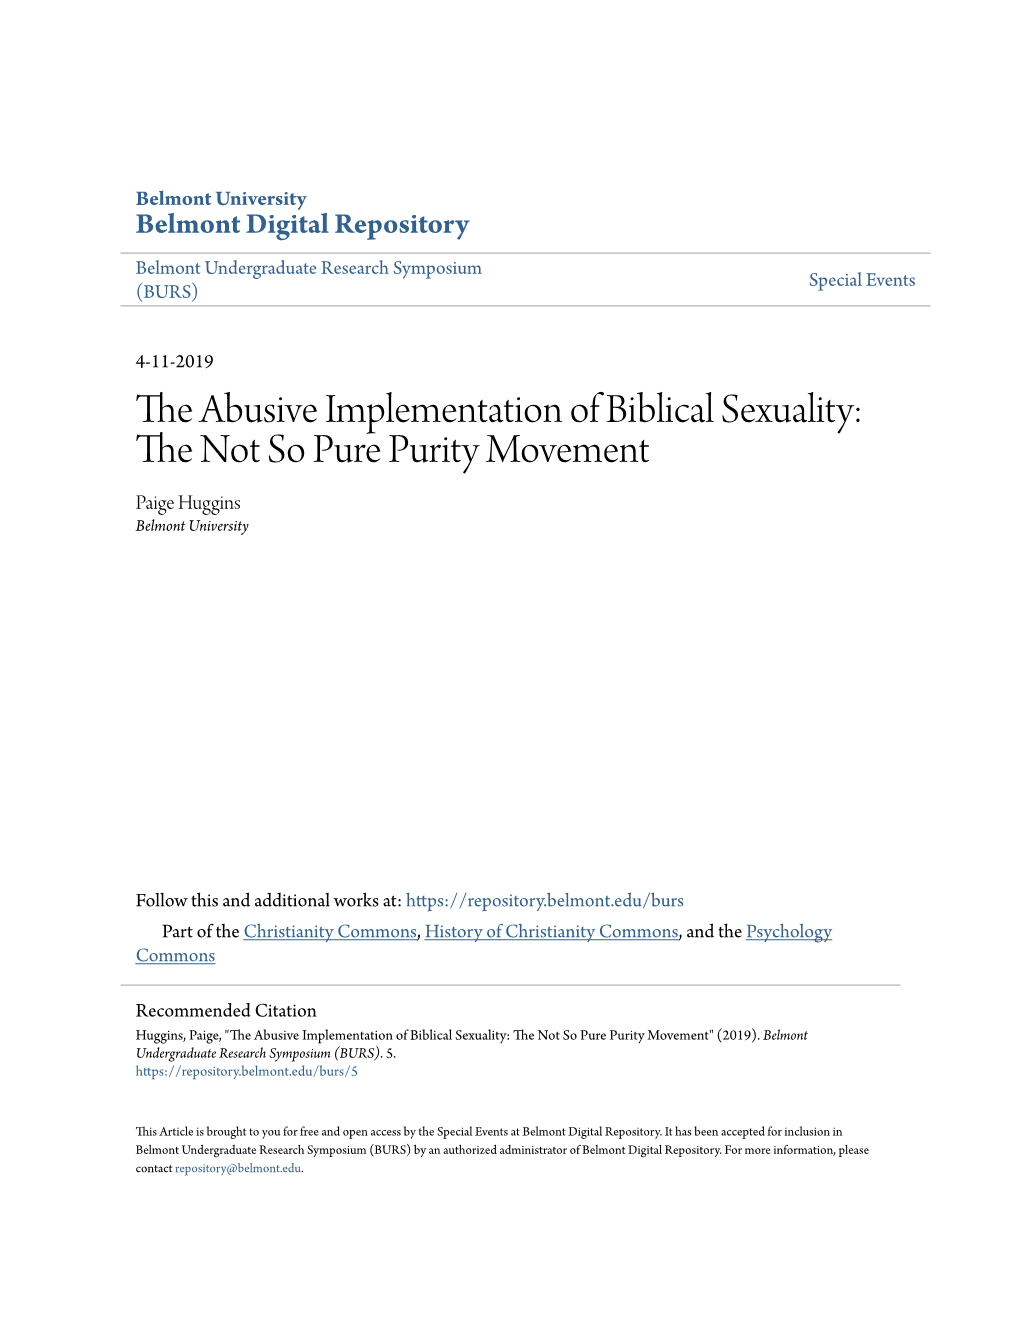 The Abusive Implementation of Biblical Sexuality: the Not So Pure